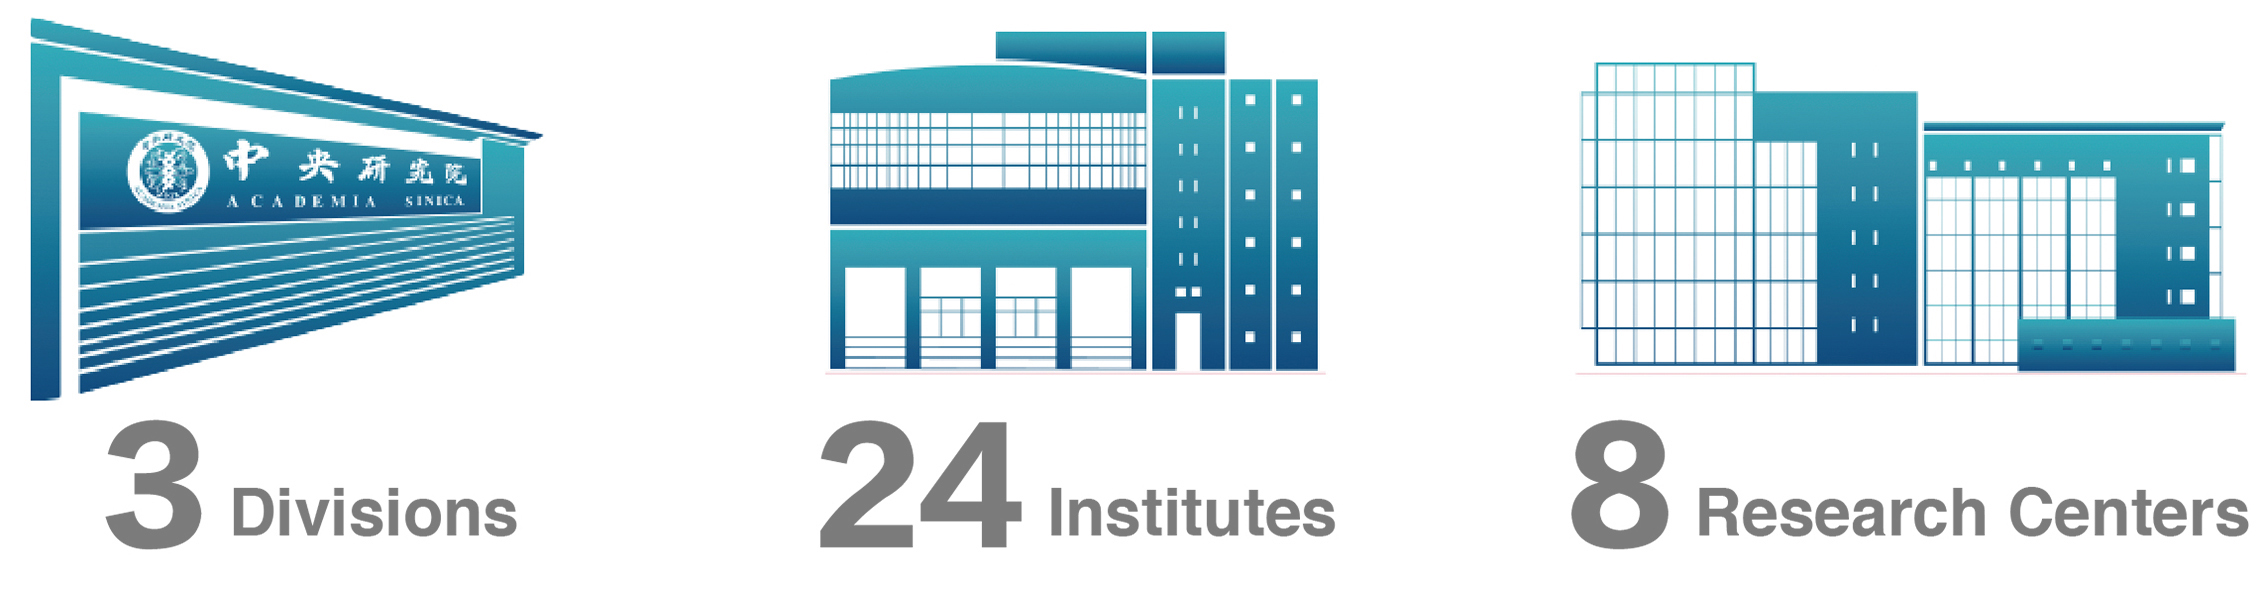 Academia Sinica currently has 24 institutes and 8 research centers located in 3 different divisions.